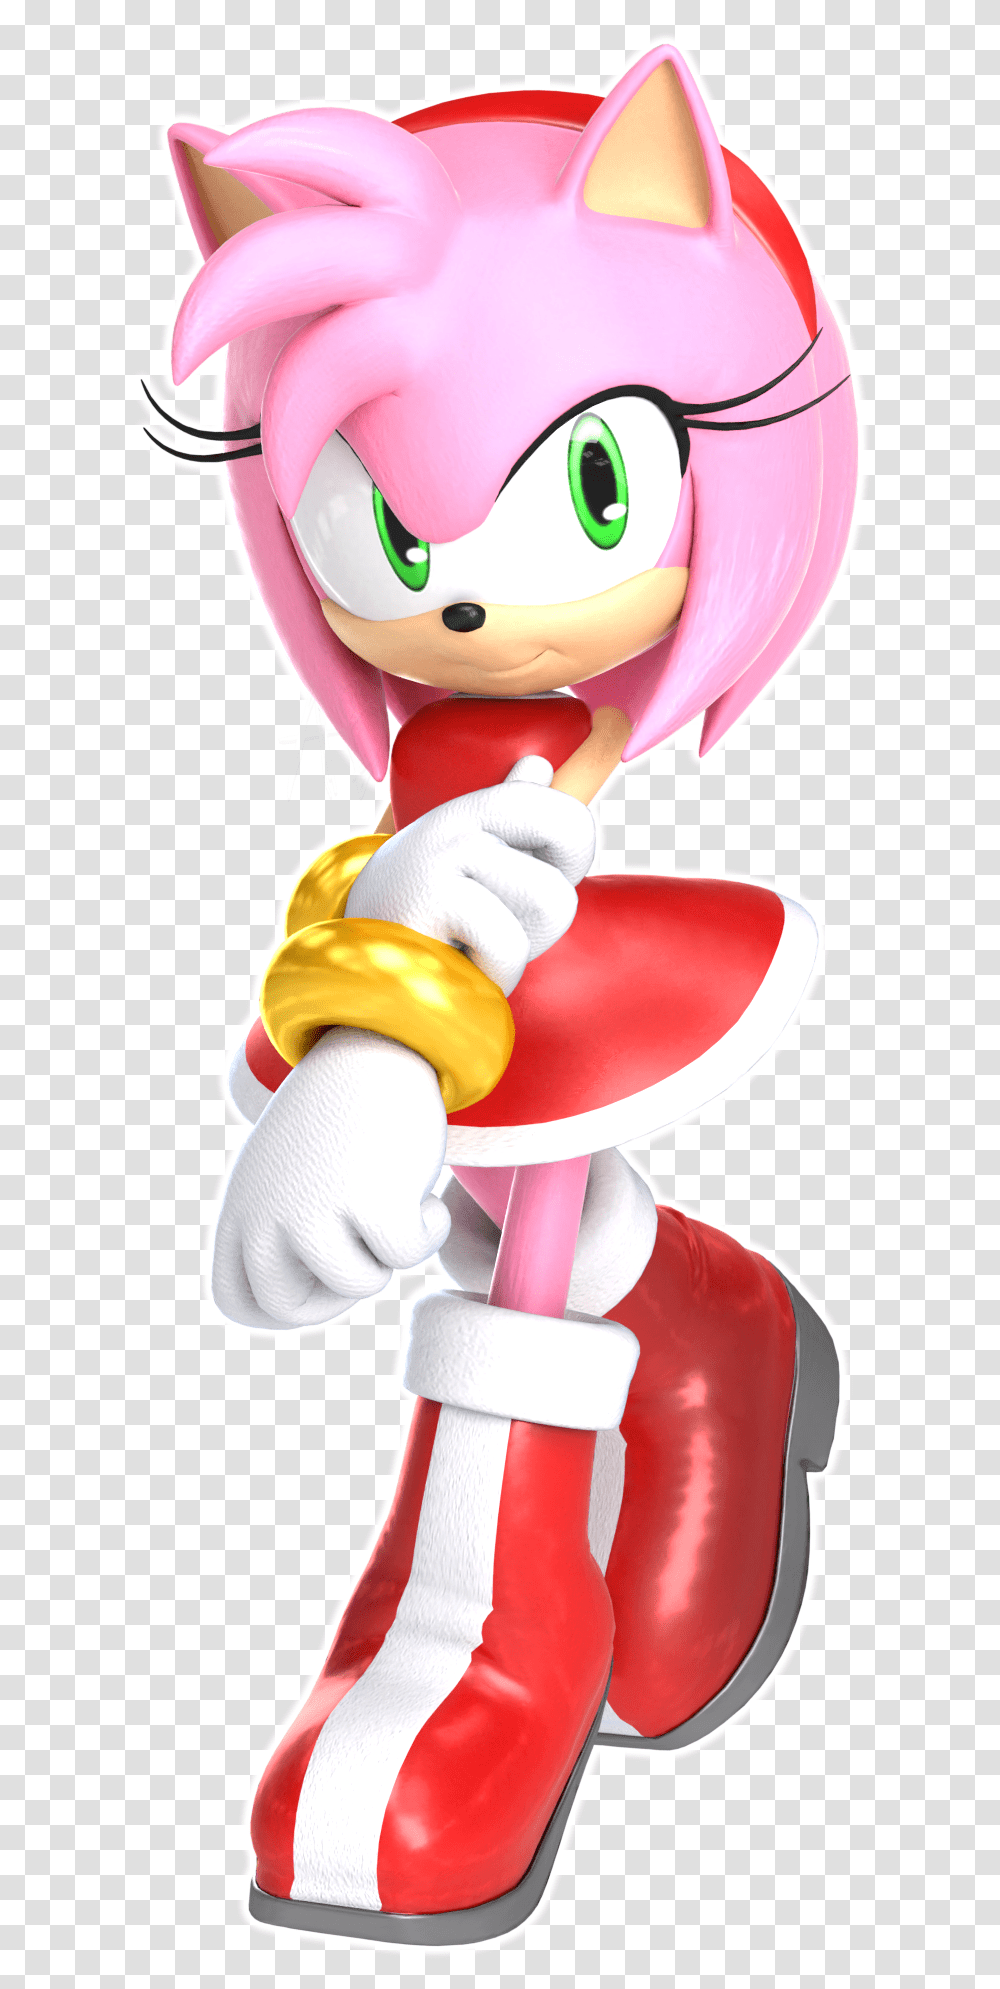 Or Bad Idea Amy Rose As A Reverse Harem Art Amy Rose Realistic, Toy, Rattle, Doll, Sweets Transparent Png